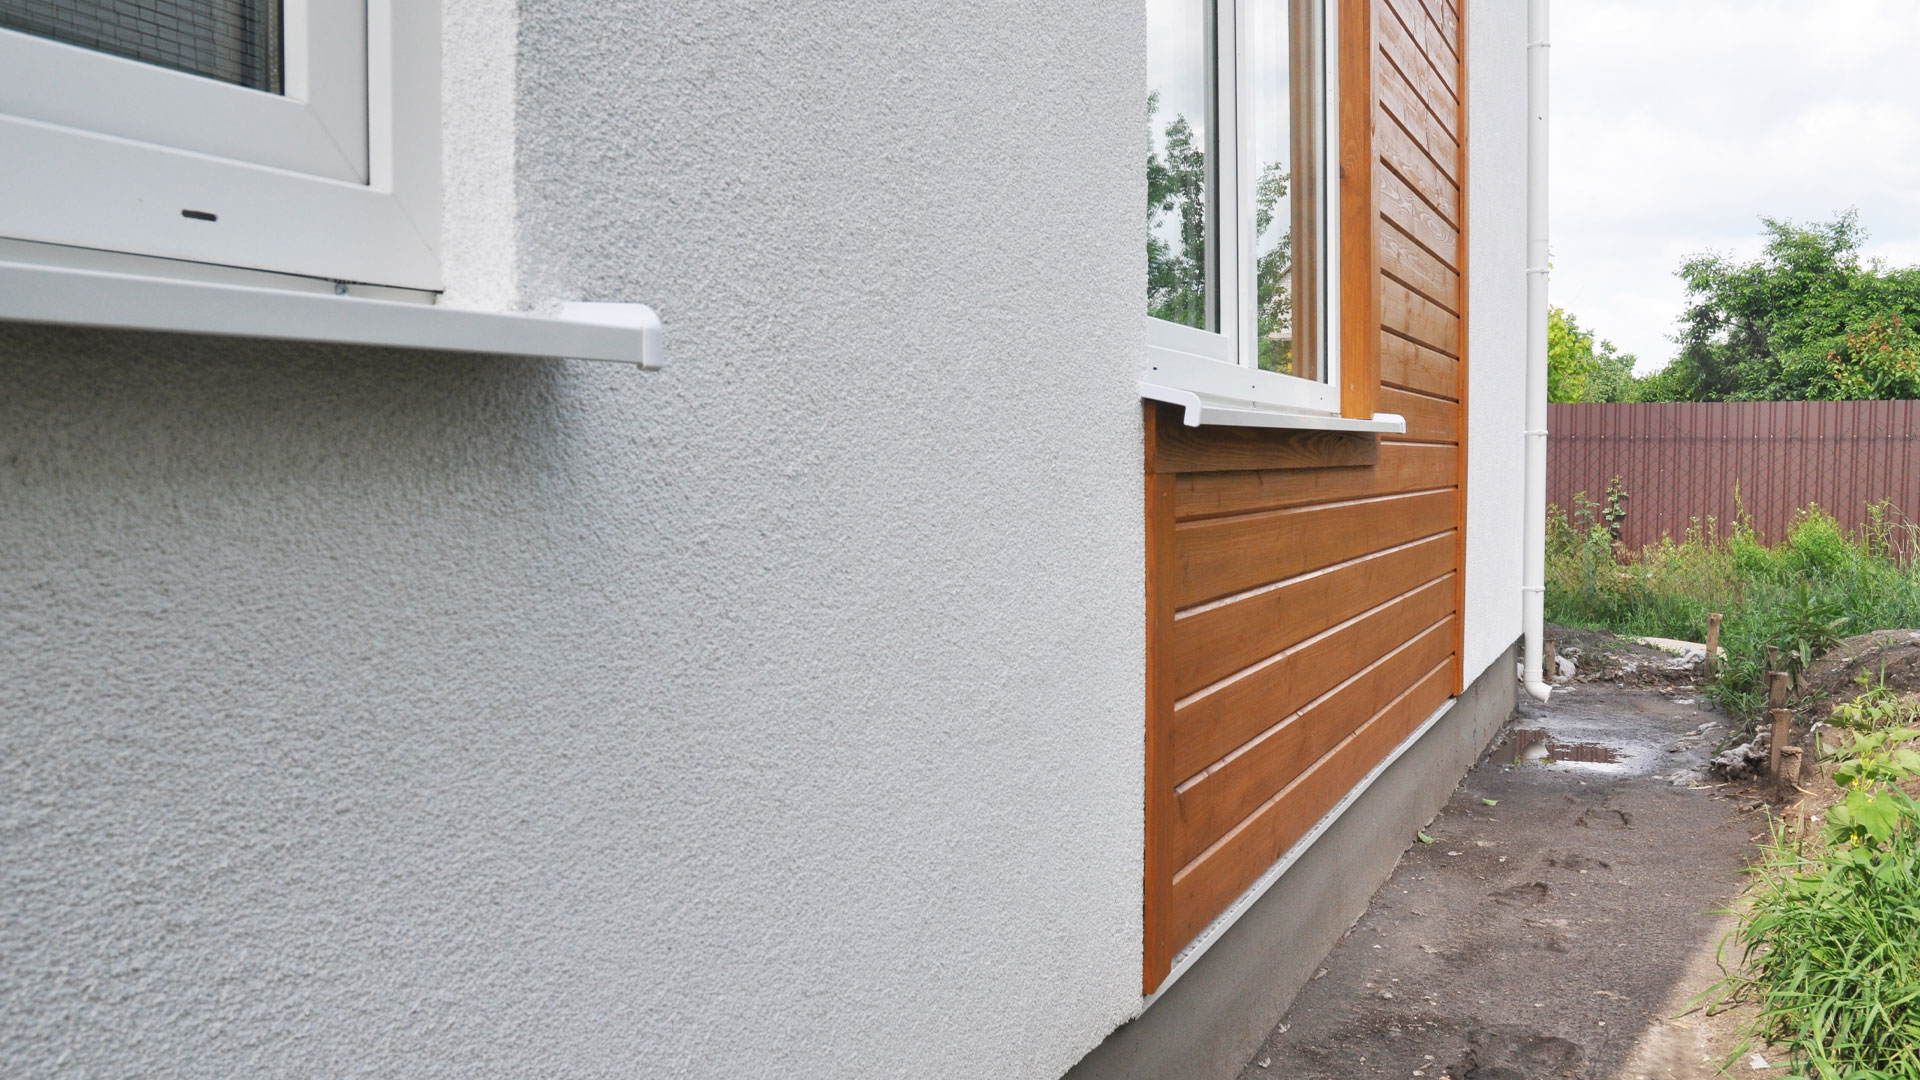 Example of roughcast cladding on a NZ home.